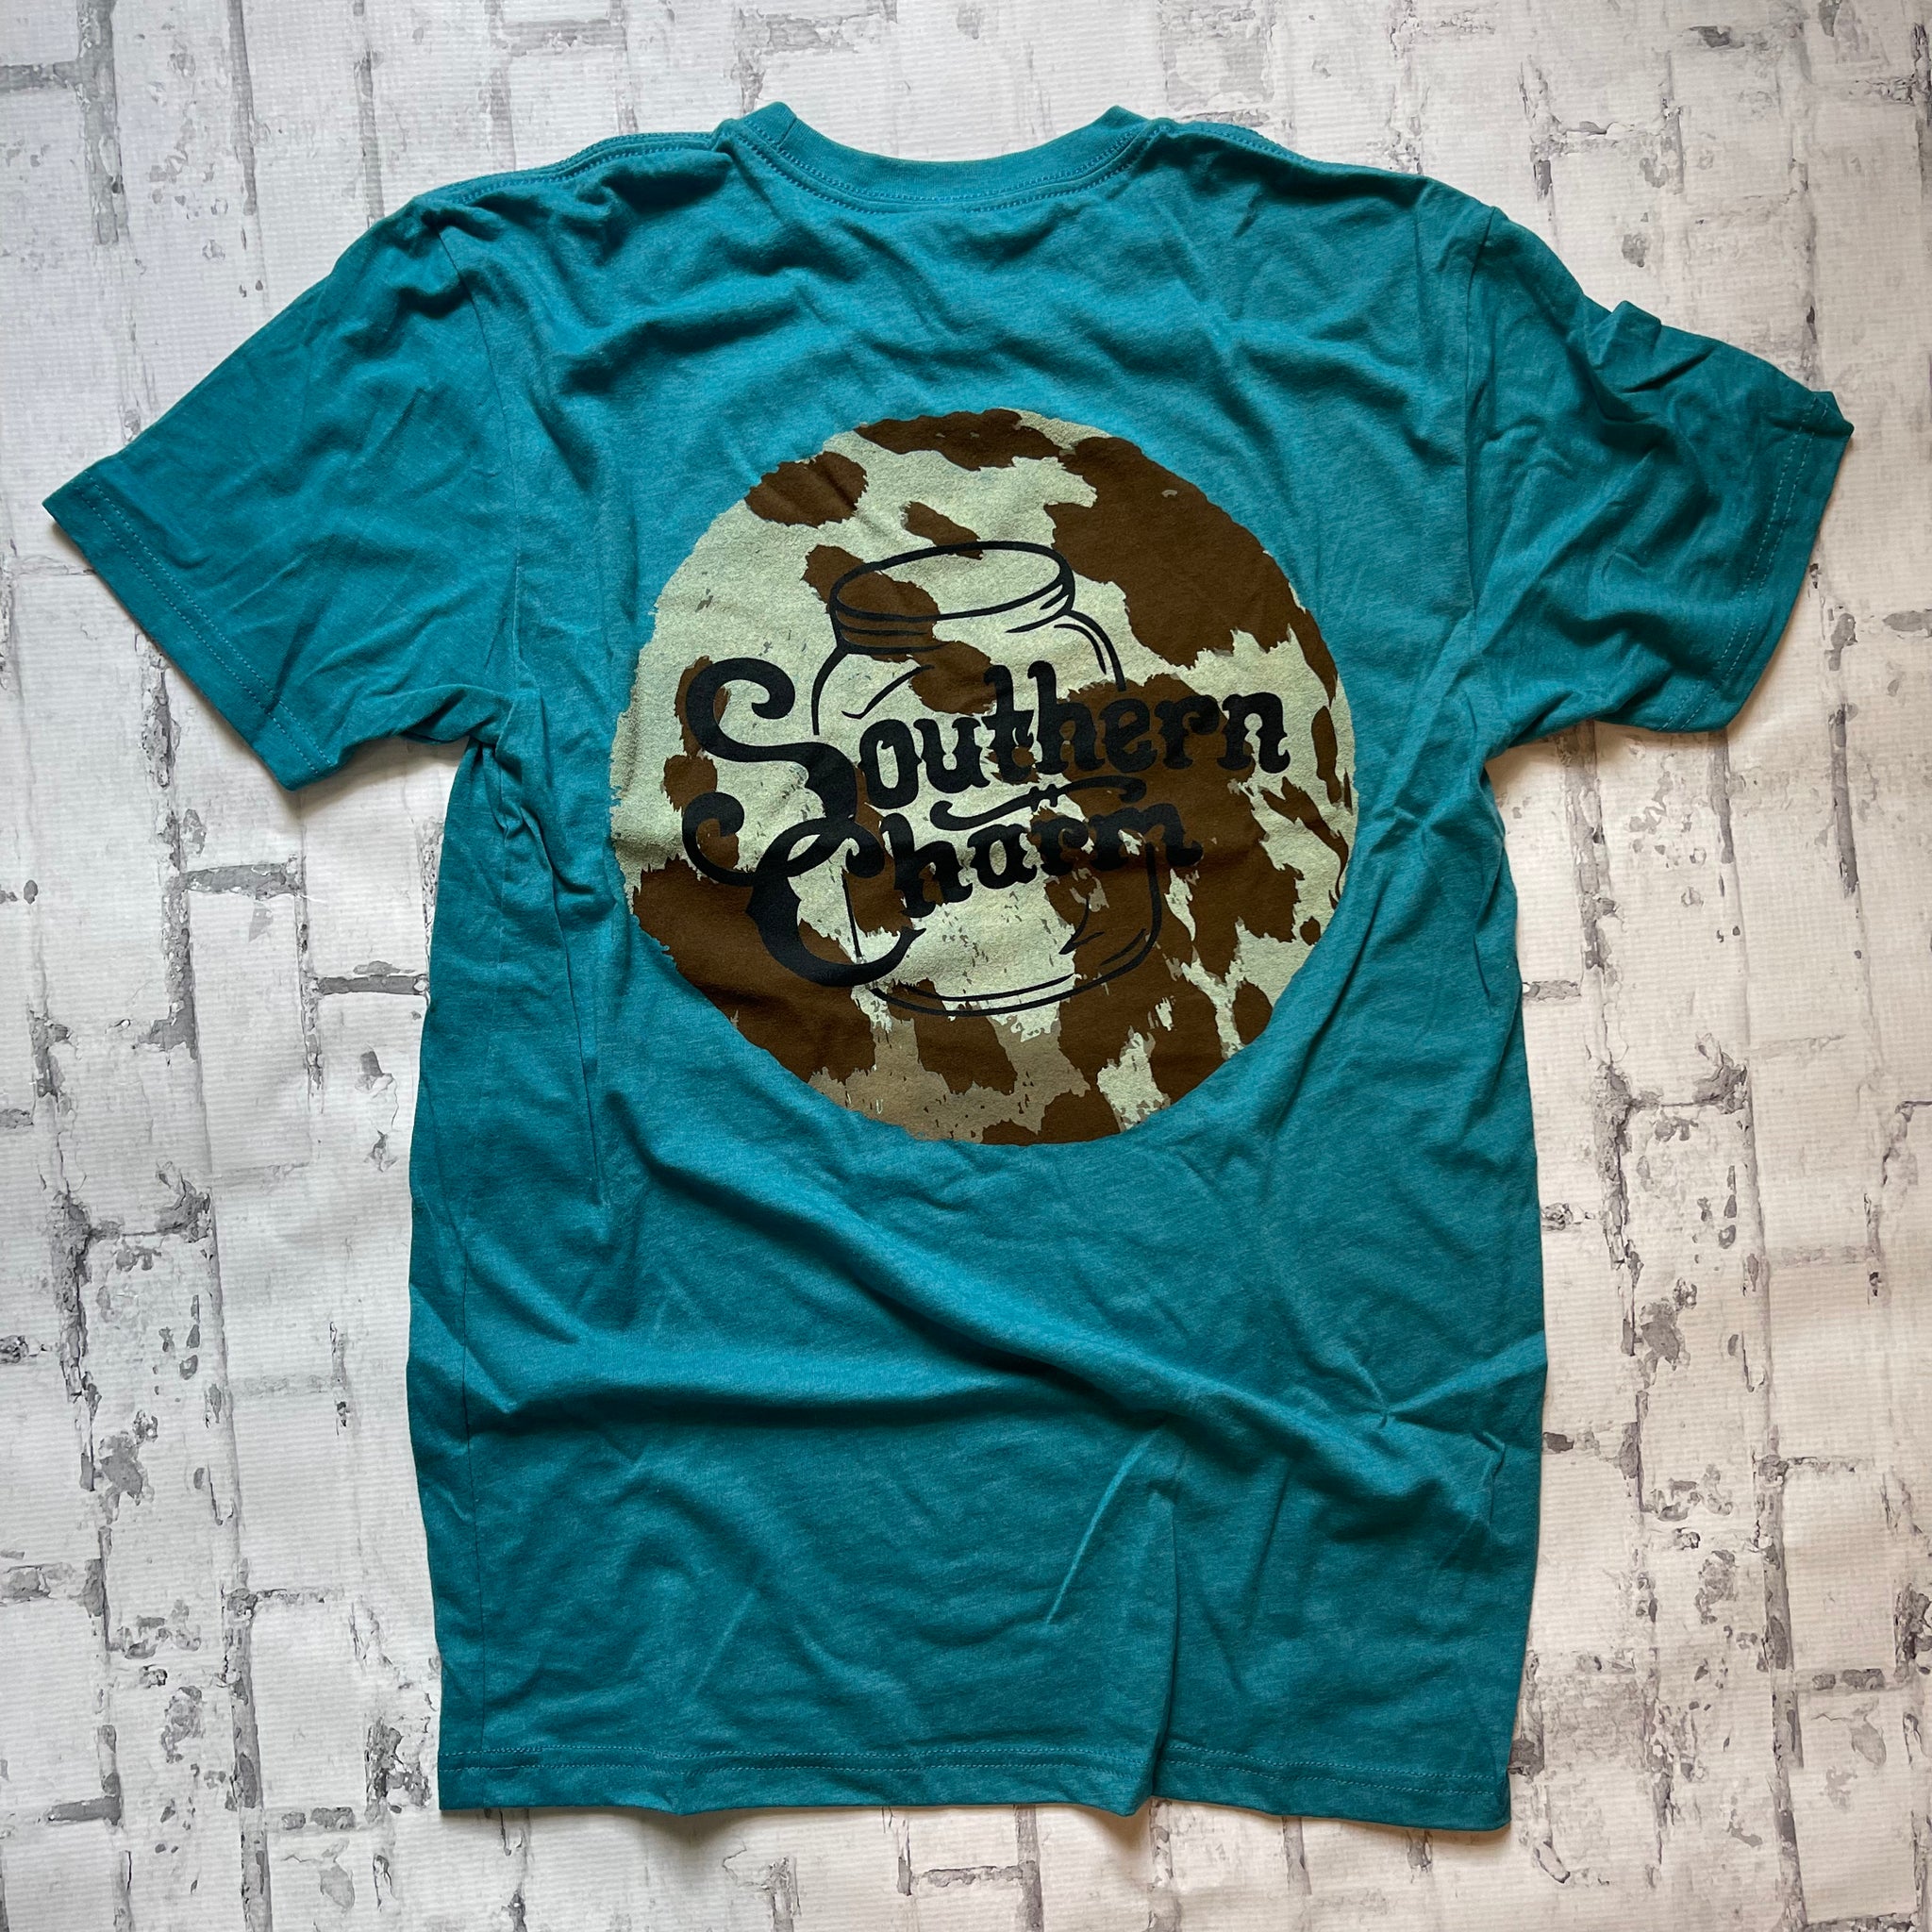 Southern Charm "Cow Original Circle" Short Sleeve T-shirt - Turquoise - Southern Charm "Shop The Charm"